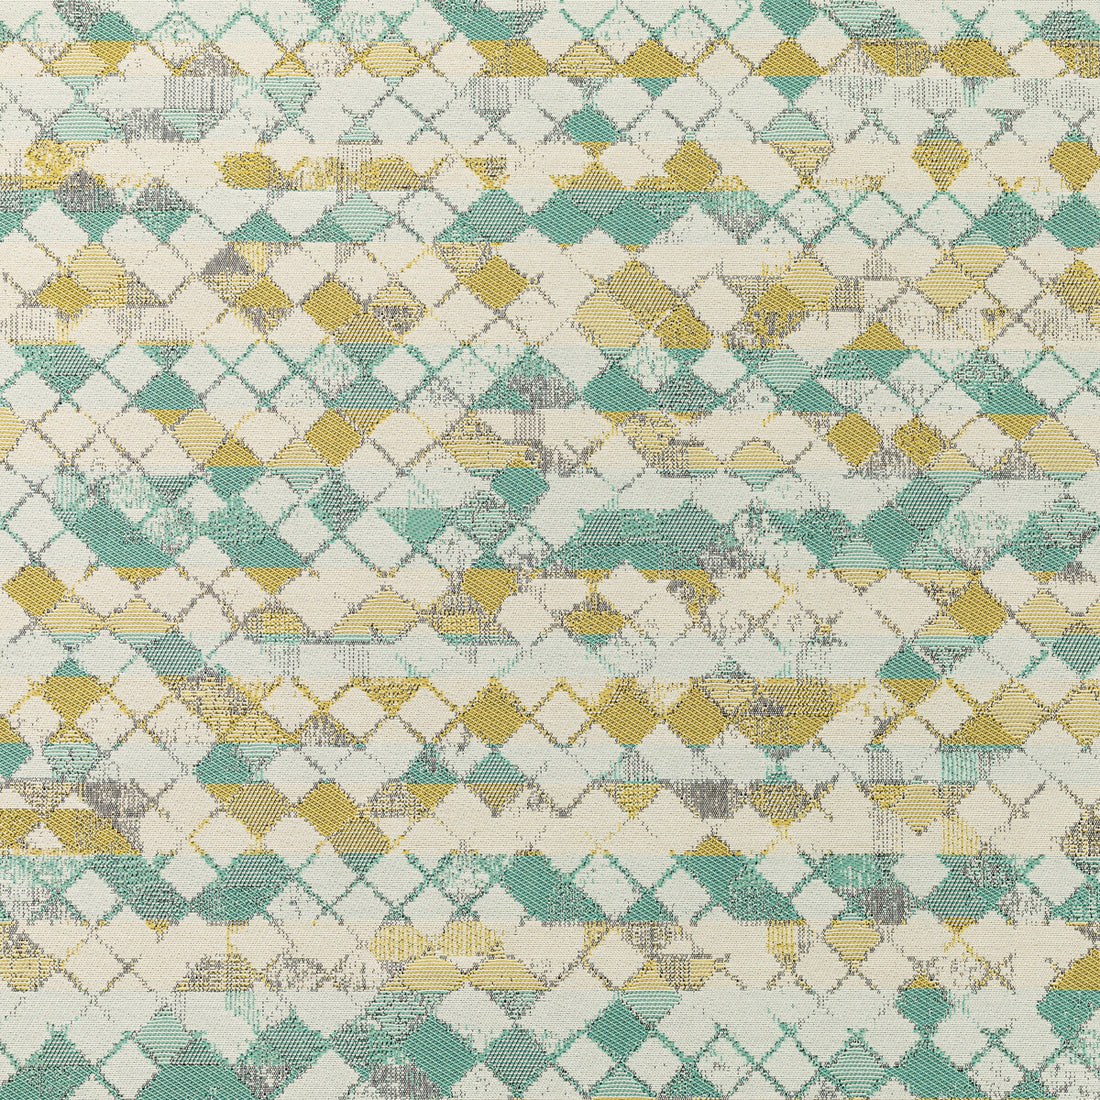 Light Point fabric in playa color - pattern 36267.413.0 - by Kravet Contract in the Gis Crypton collection